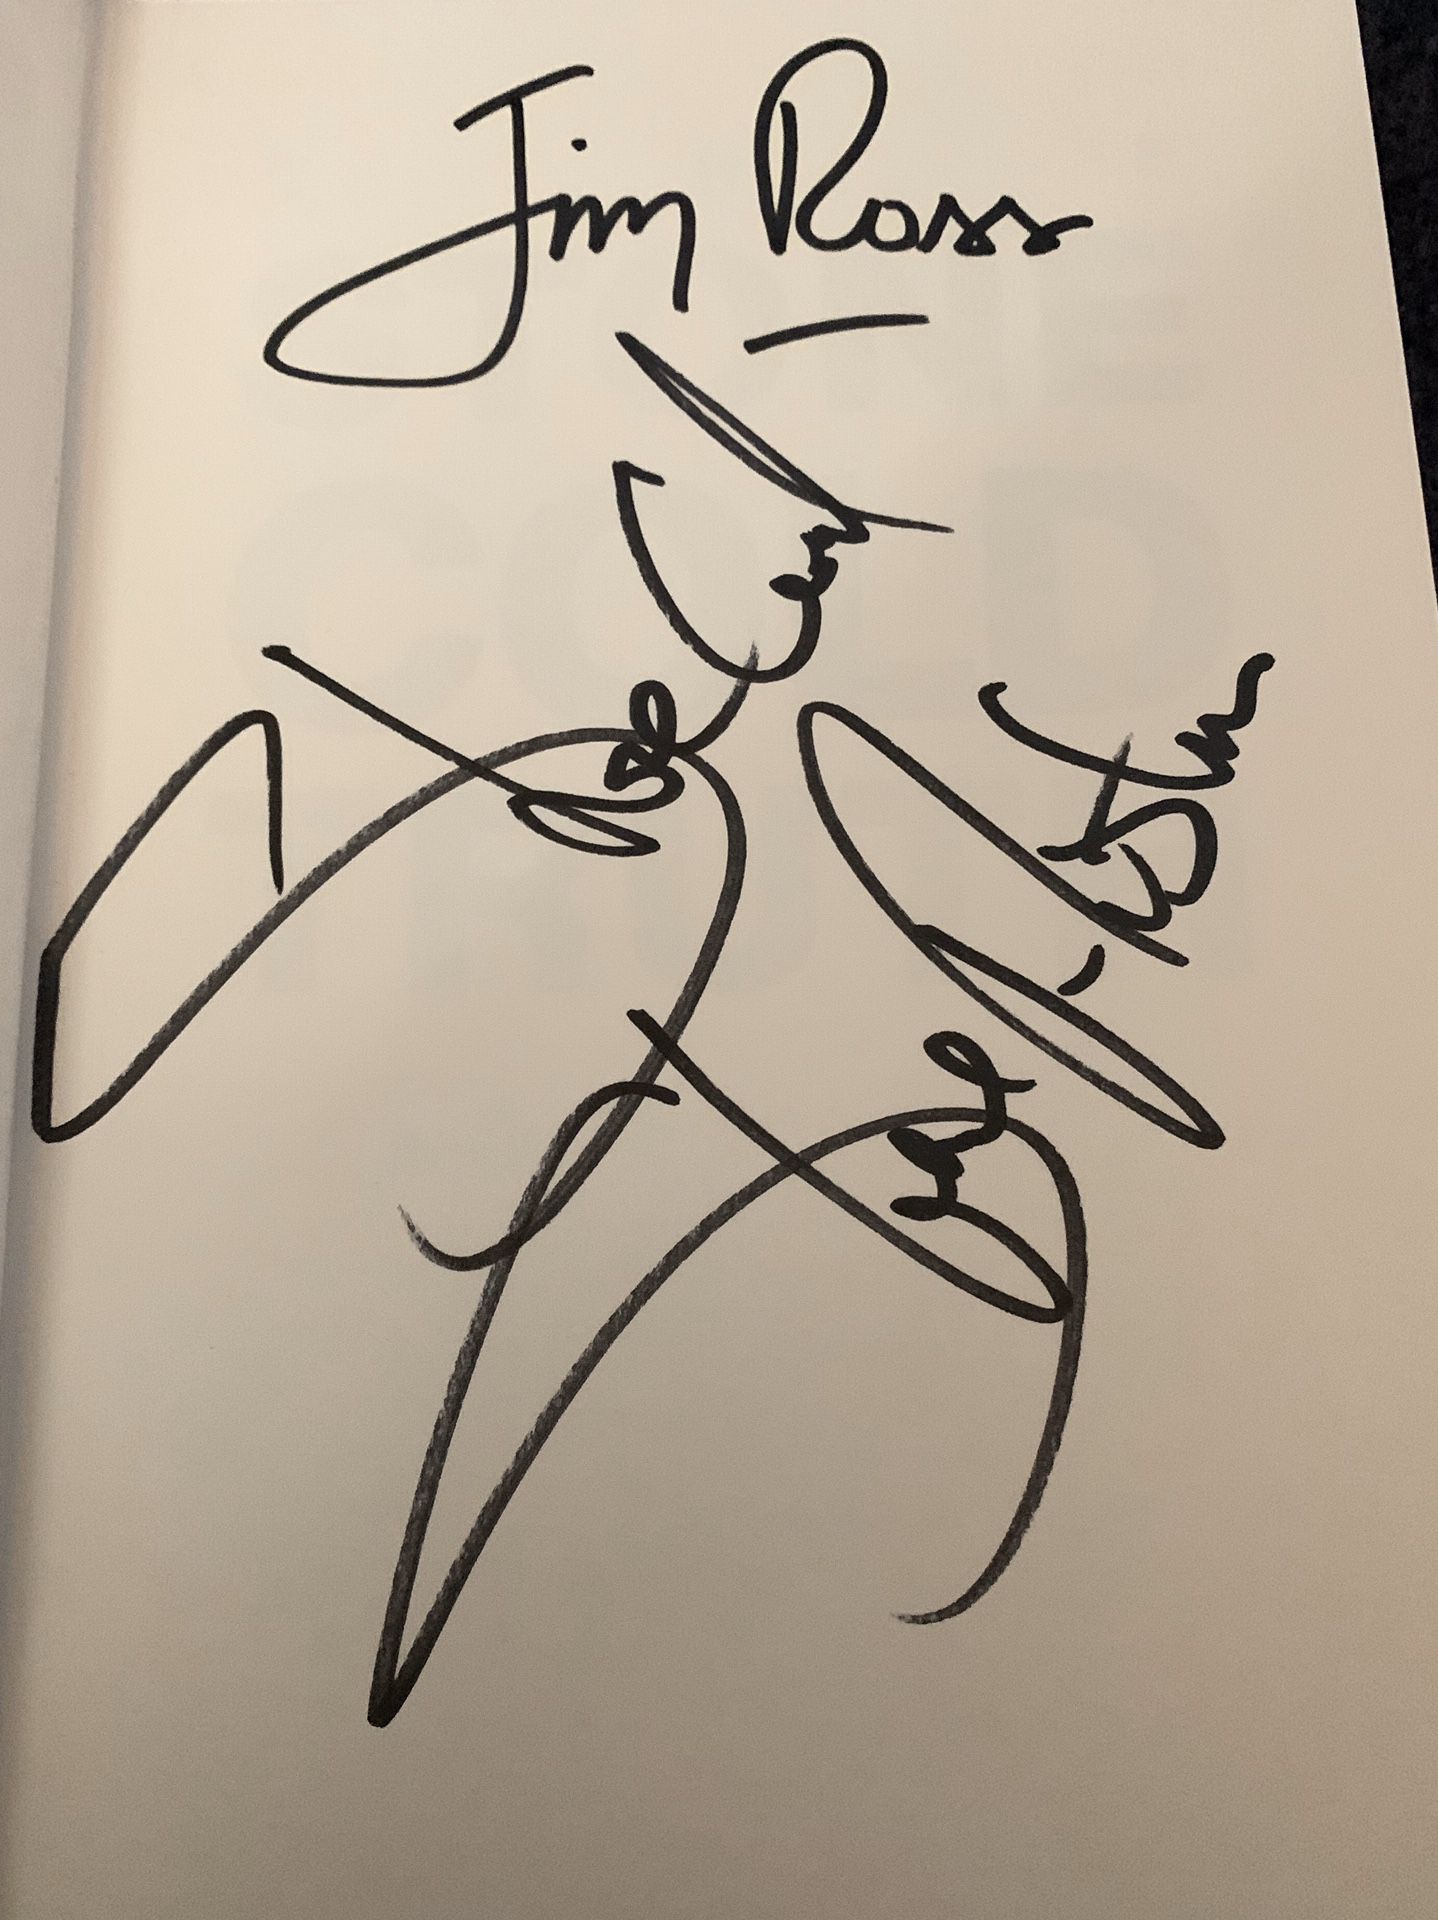 Stone Cold Steve Austin and Jim Ross Signed Book